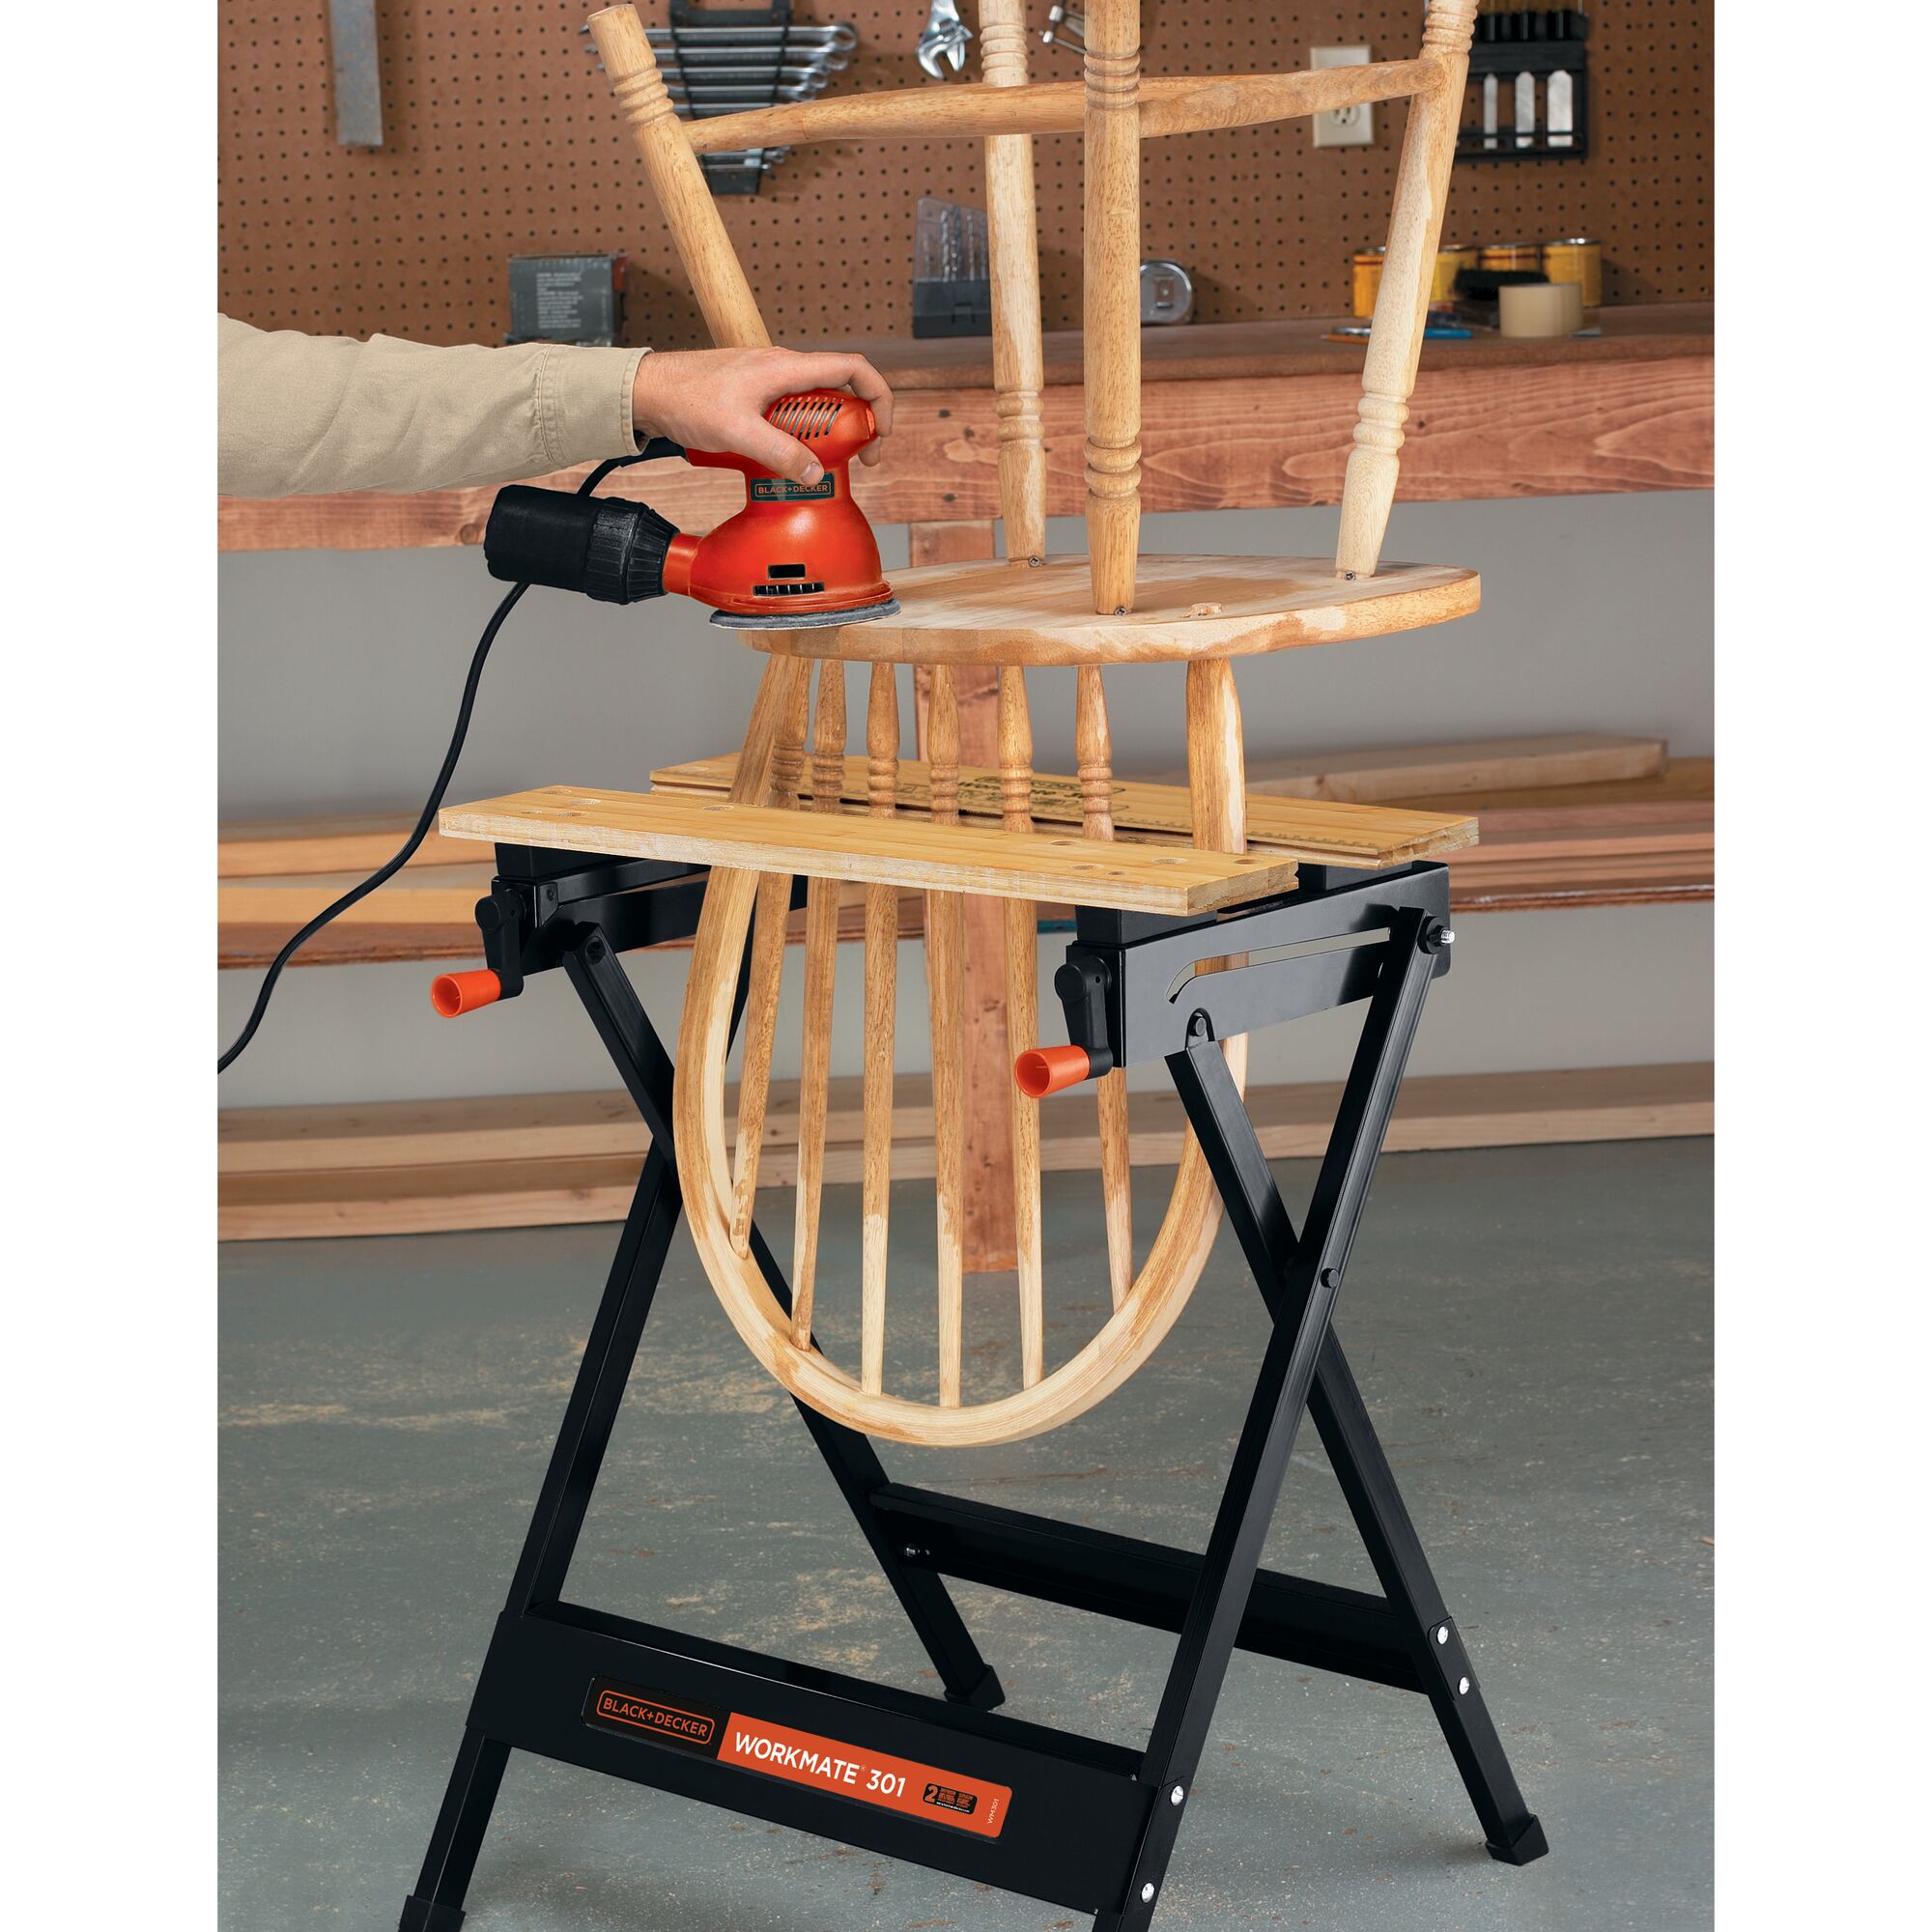 Workmate Portable Project Center and Vise being used to work on a wooden chair by a person.